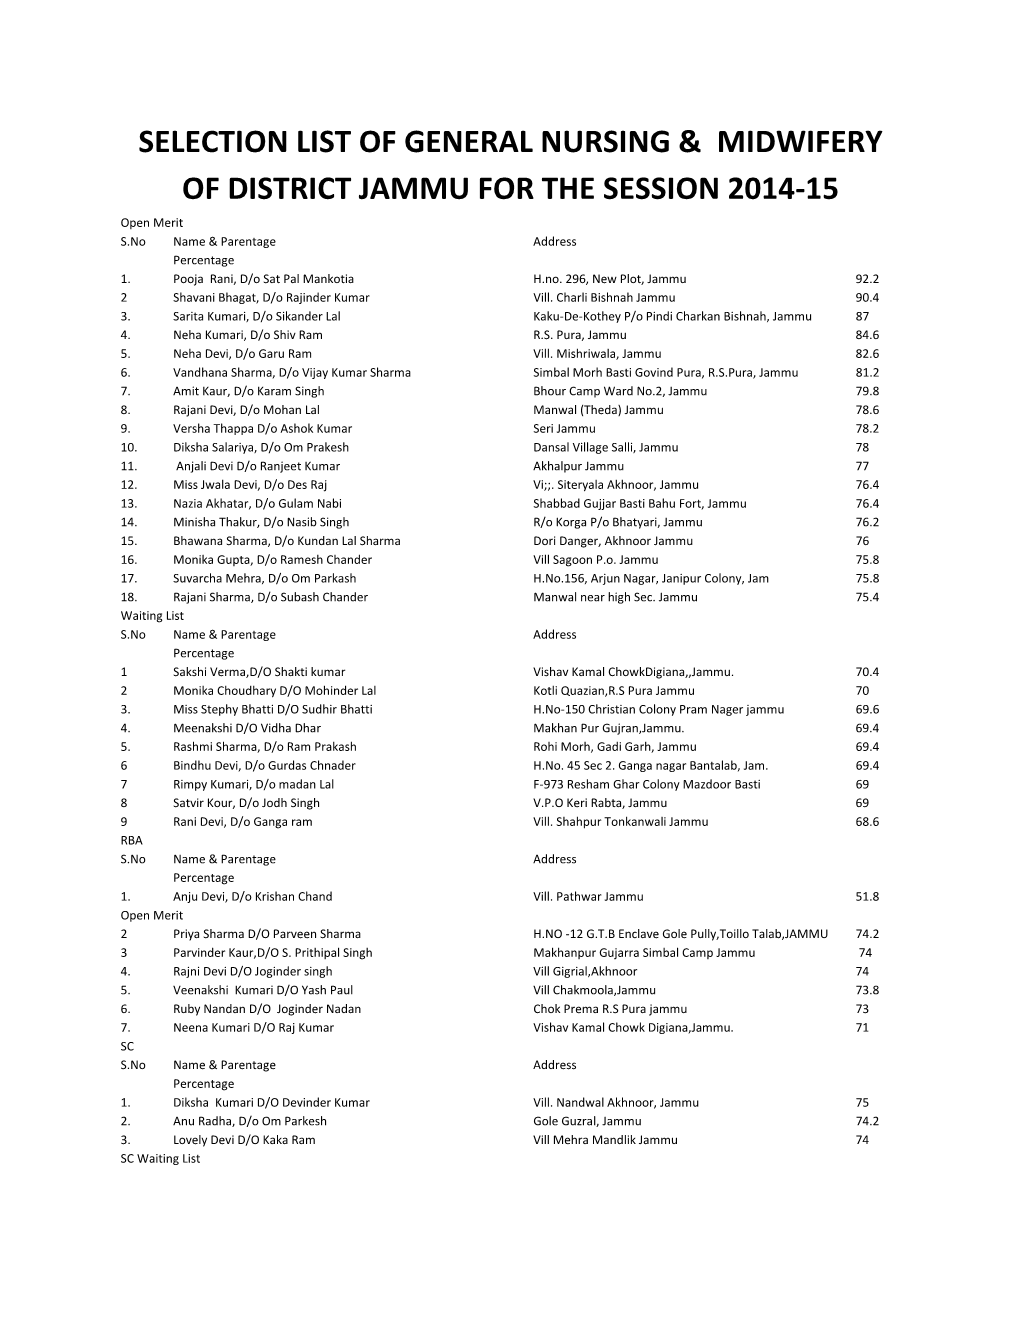 Selection List of General Nursing & Midwifery of District Jammu for The